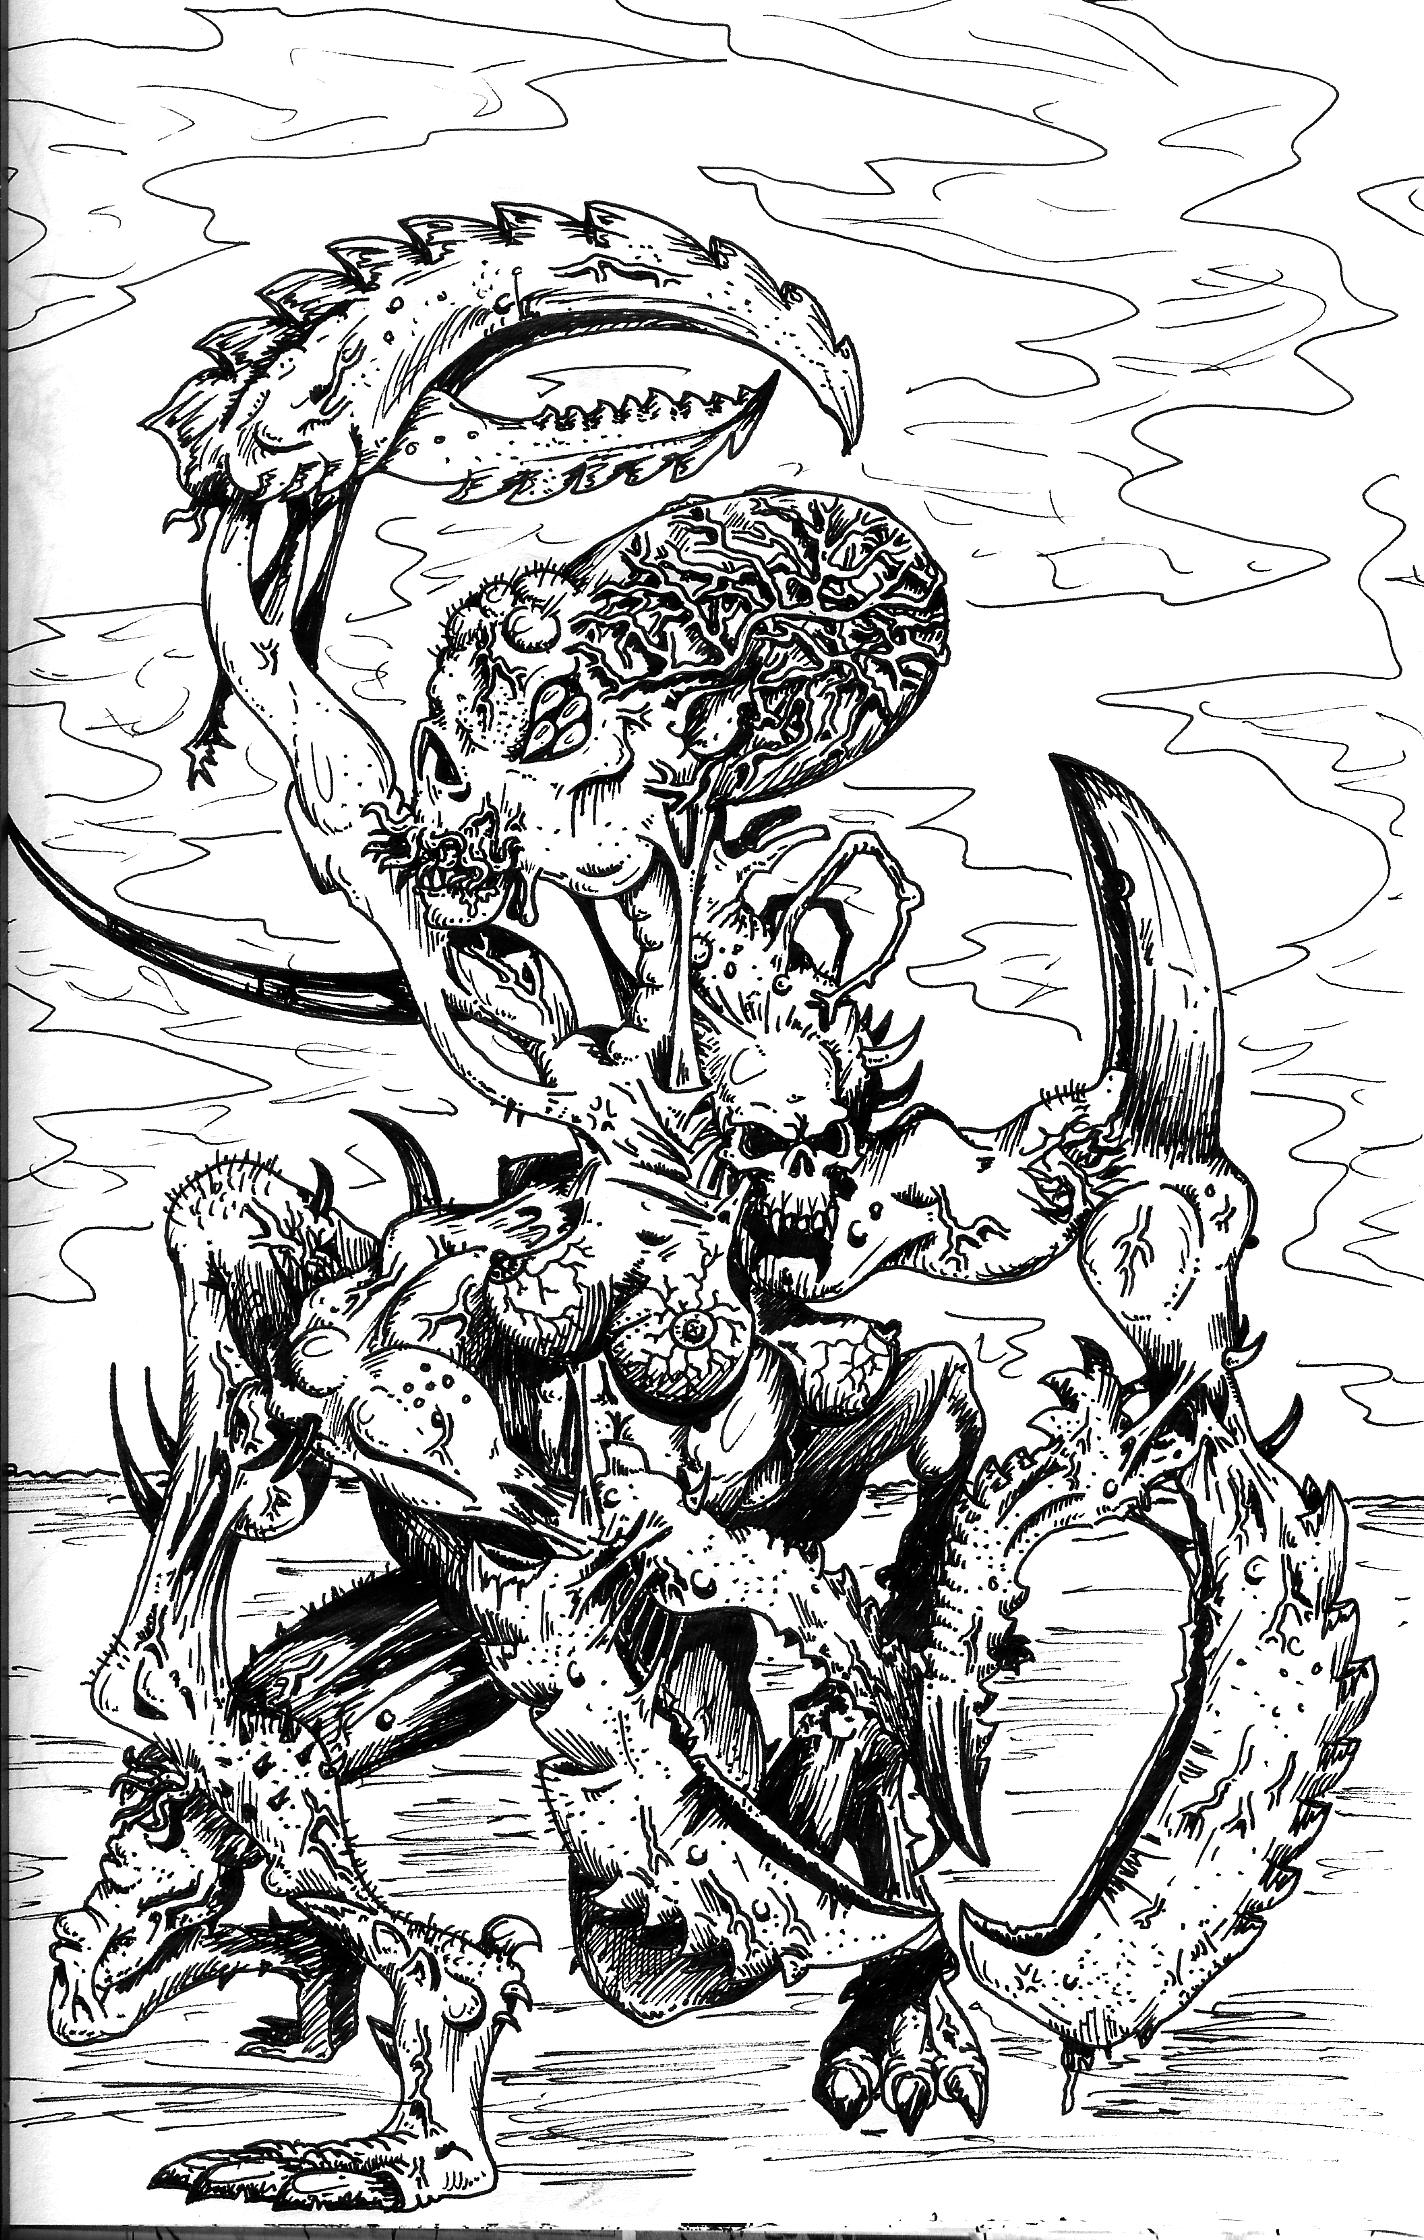 80´s, Artwork, Big, Chaos, Crazy, Daemons, Drawing, Drawings, Old, Old Style, School, Scratch, Slaanesh, Style, Ugly